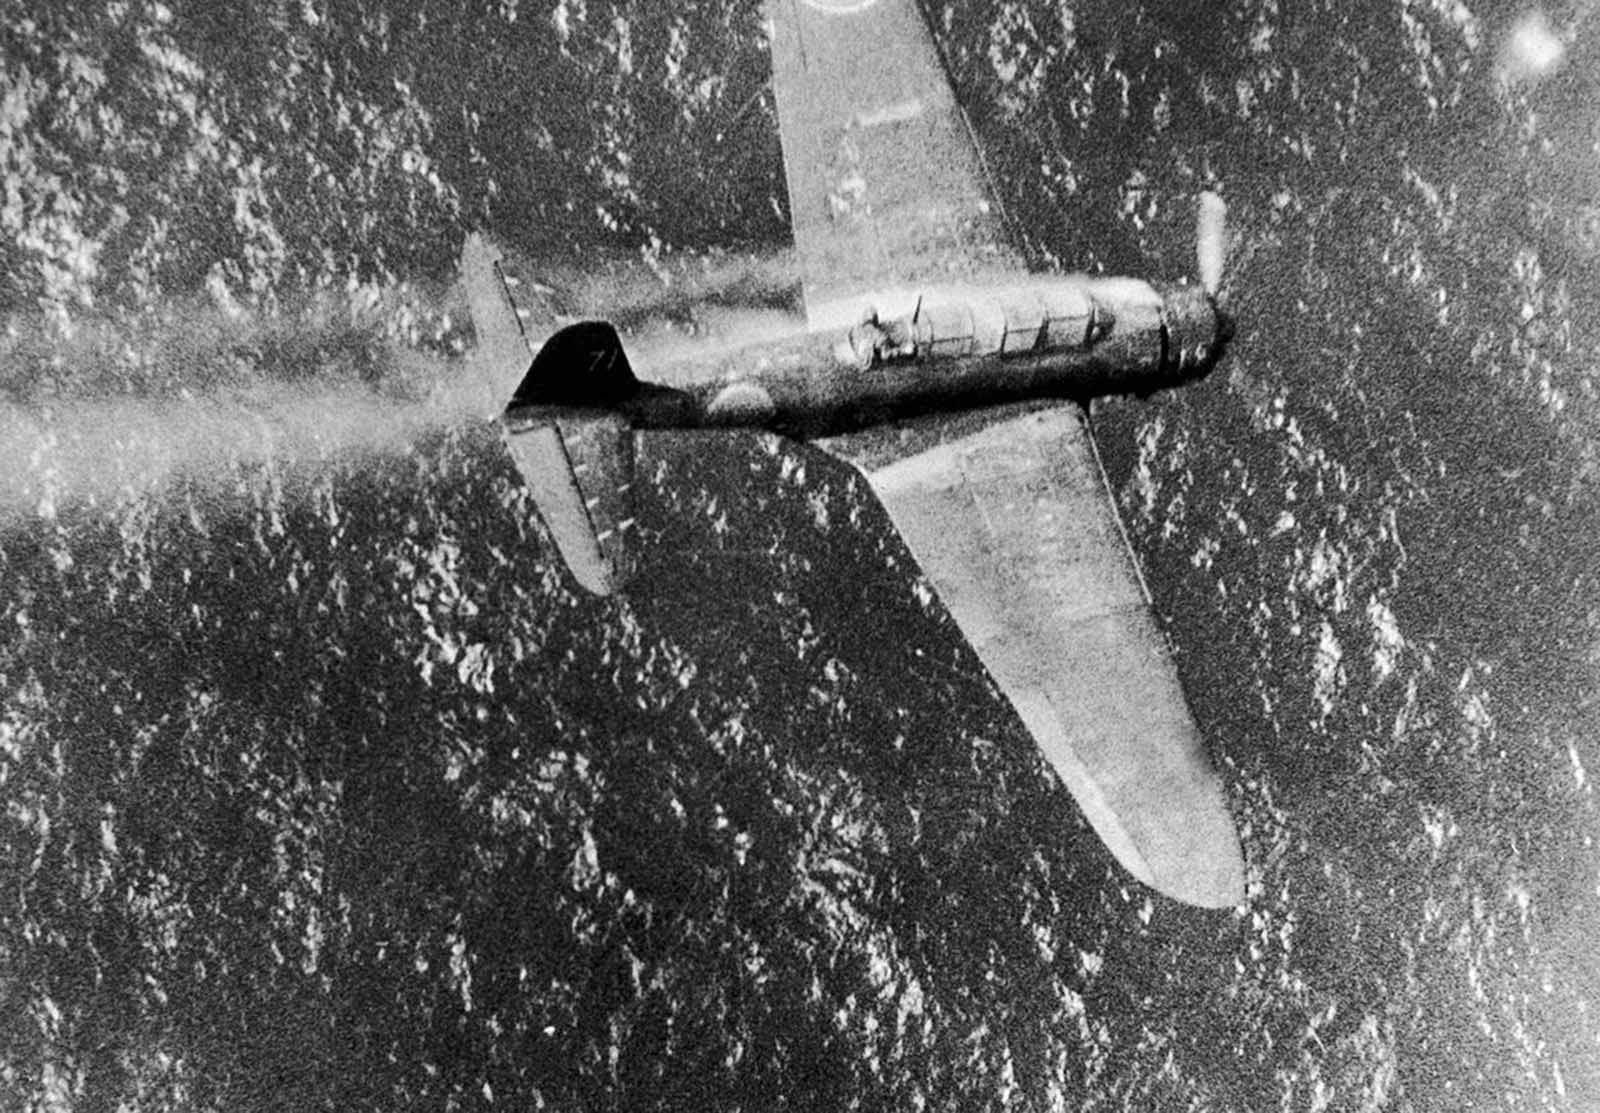 With its gunner visible in the back cockpit, this Japanese dive bomber, smoke streaming from the cowling, is headed for destruction in the water below after being shot down near Truk, Japanese stronghold in the Carolines, by a Navy PB4Y on July 2, 1944. Lieutenant Commander William Janeshek, pilot of the American plane, said the gunner acted as though he was about to bail out and then suddenly sat down and was still in the plane when it hit the water and exploded.